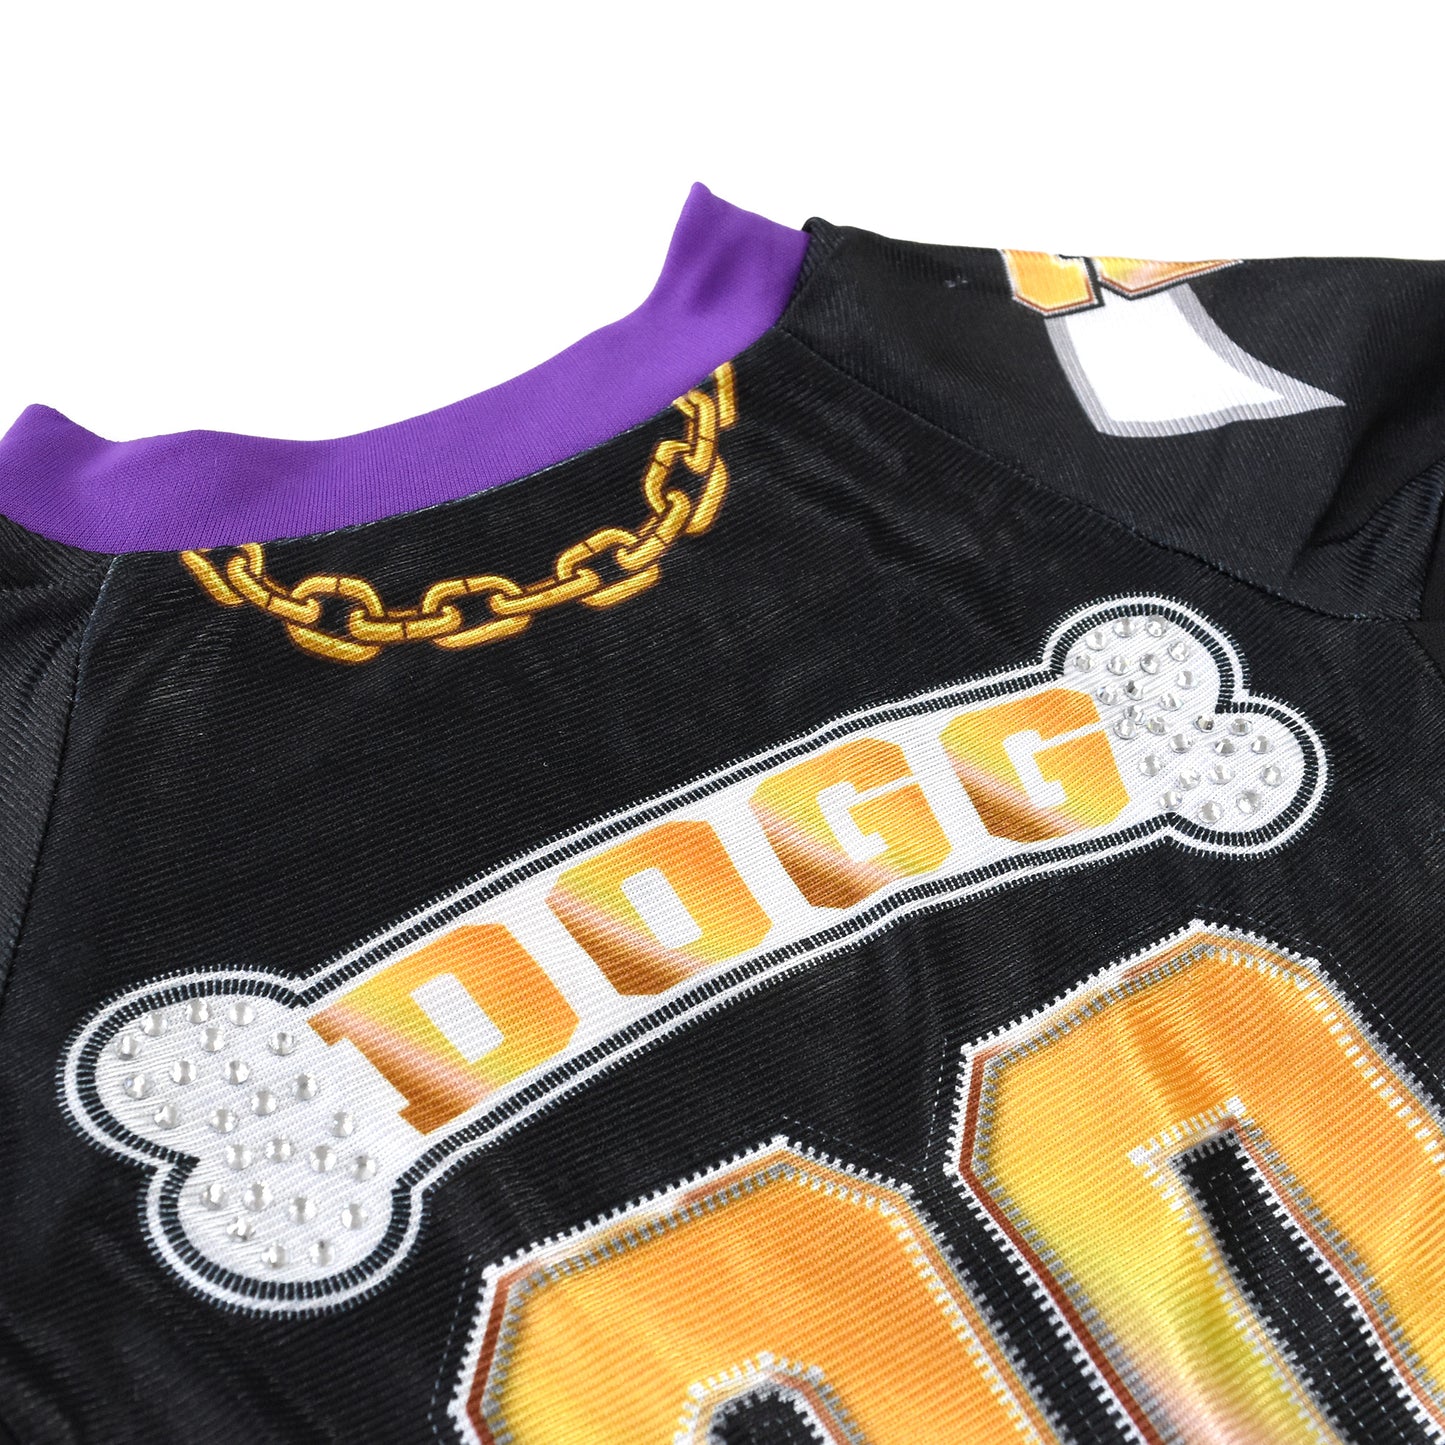 A close up detail image showing design sublimation and sparkle detail of the Off The Chain Deluxe Pet Jersey.